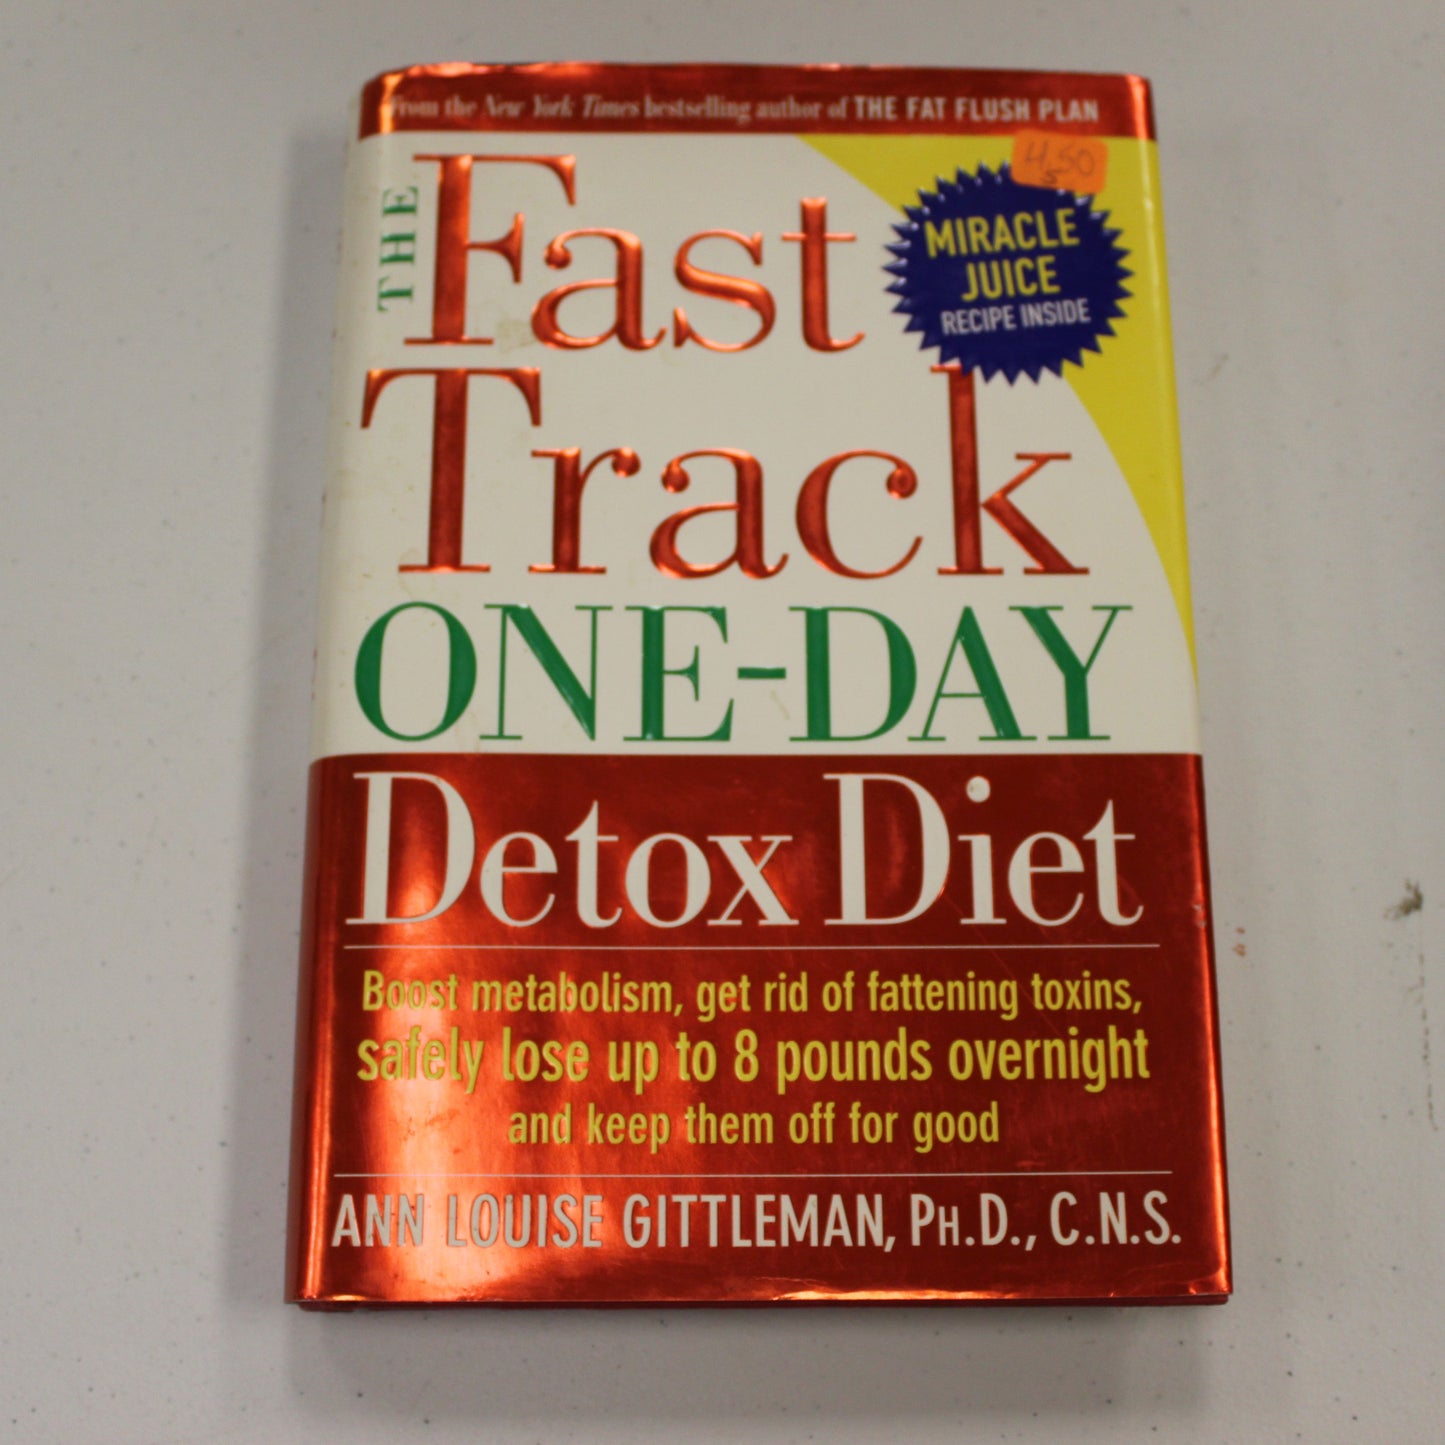 THE FAST TRACK ONE-DAY DETOX DIET